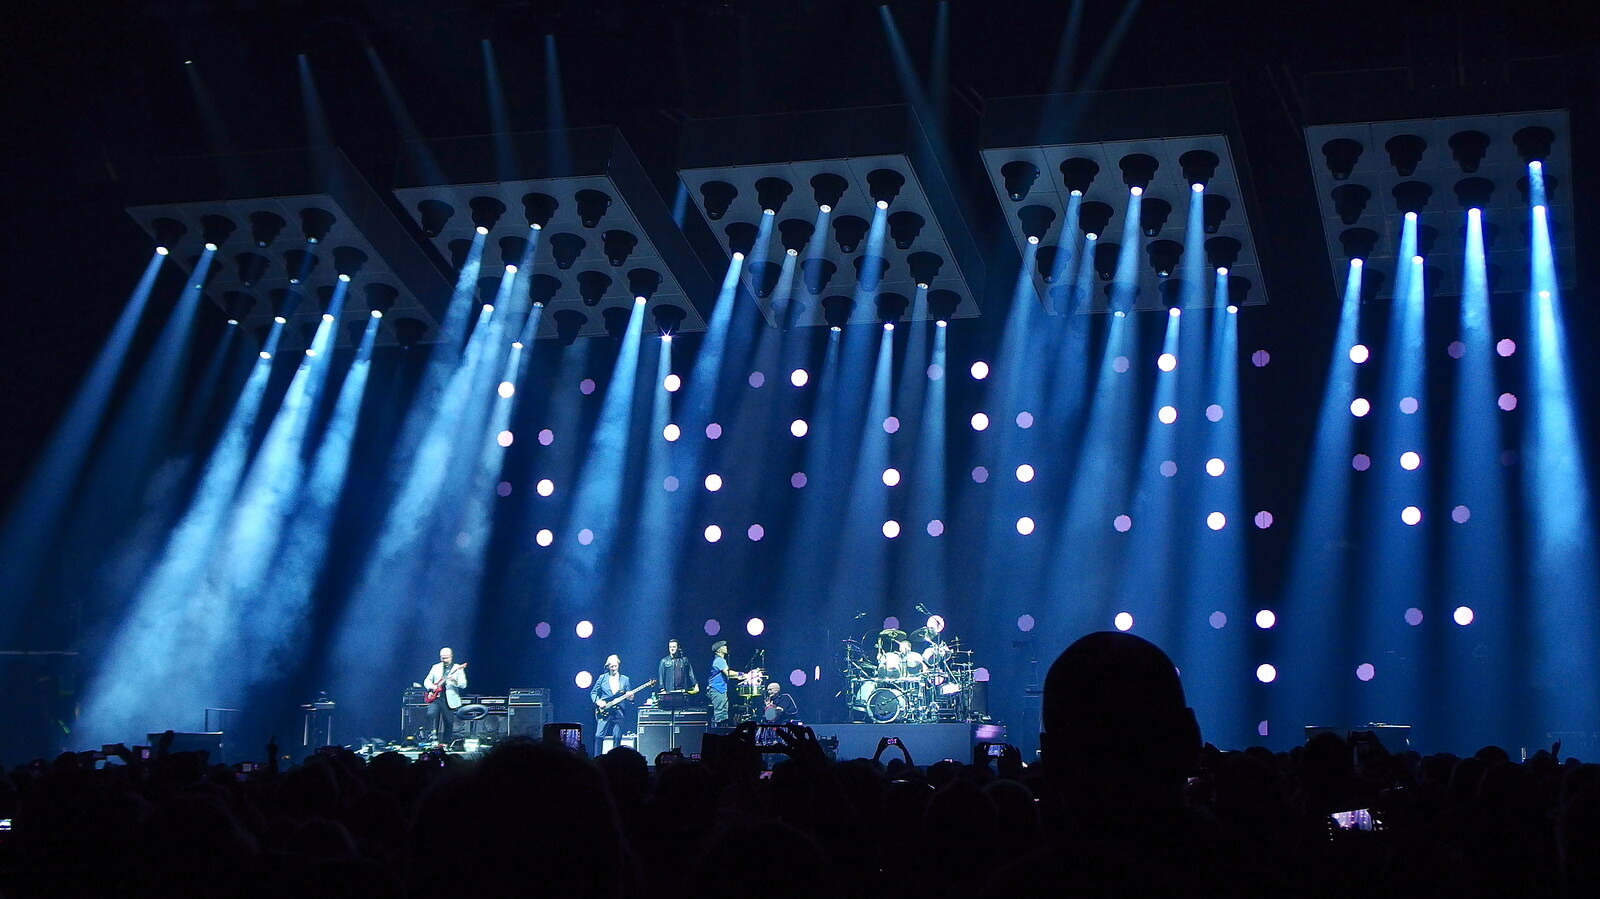 The band takes to the stage from Genesis at the O2, North Greenwich, London - 24th March 2022